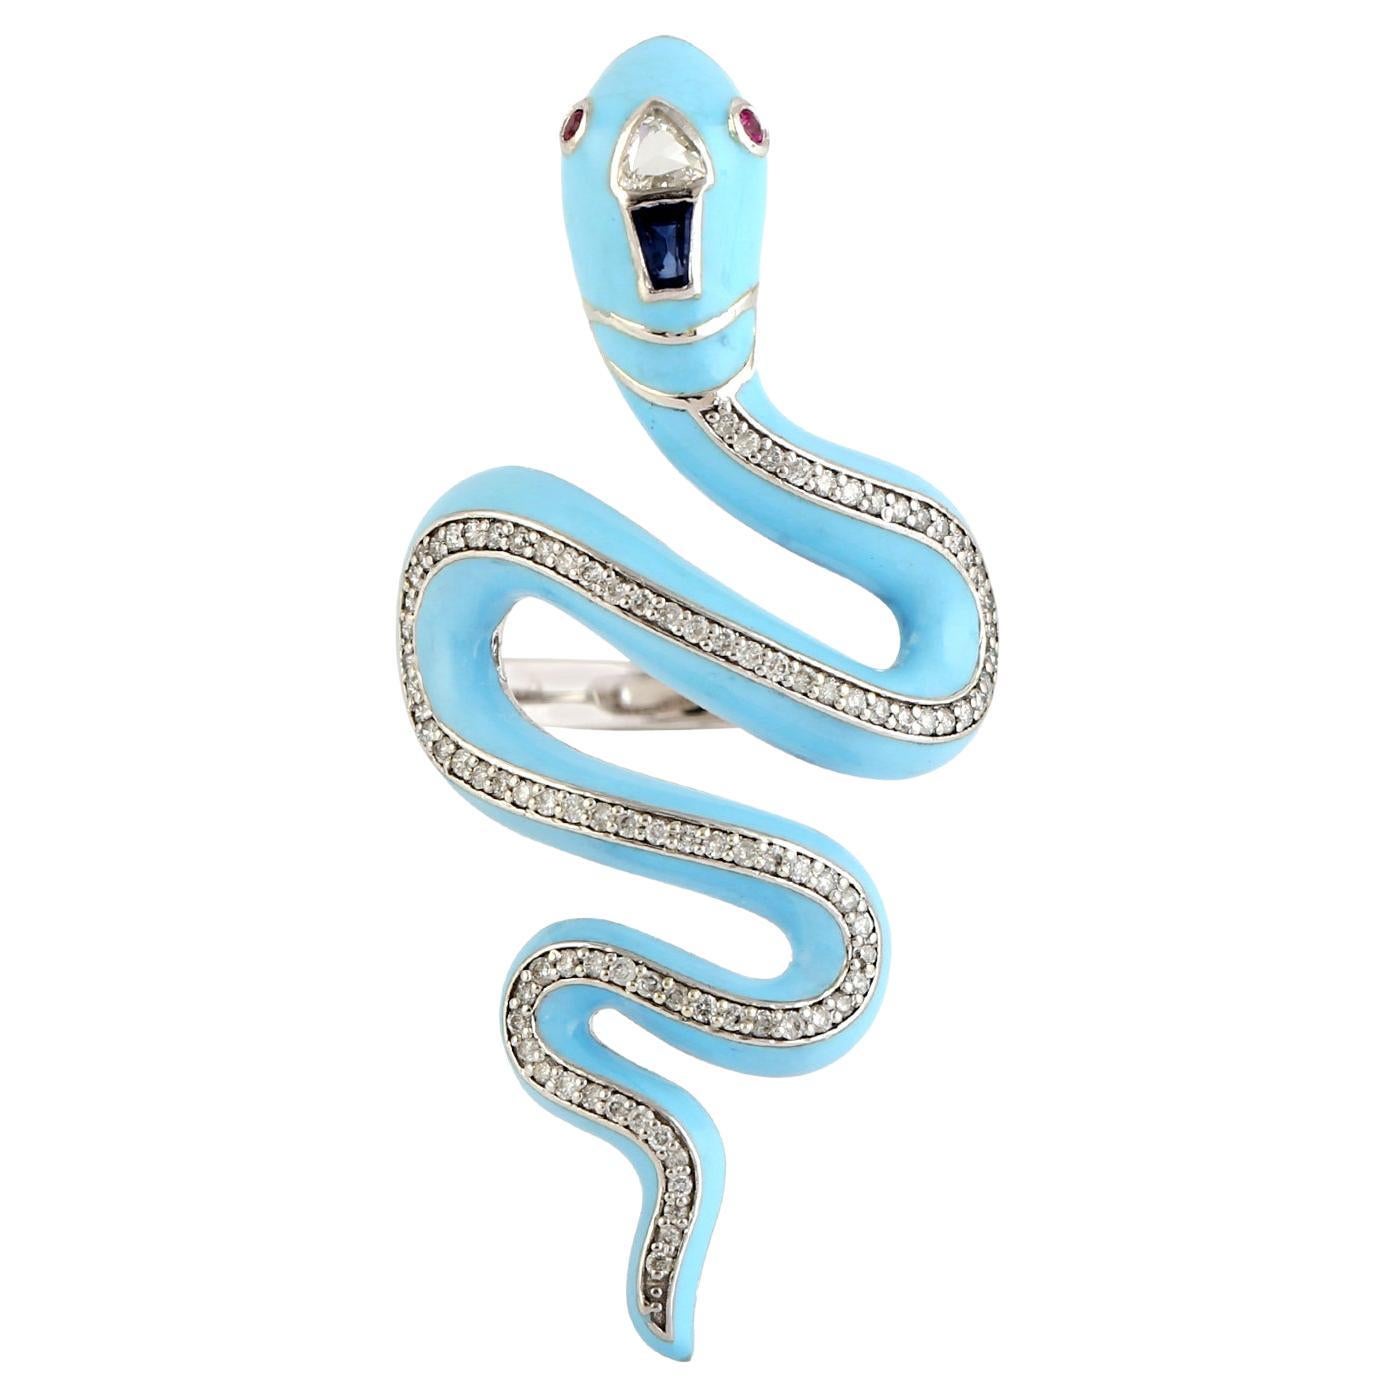 Blue Enamel Snake Shaped Long Ring With Ruby, Sapphire & Pave Diamonds